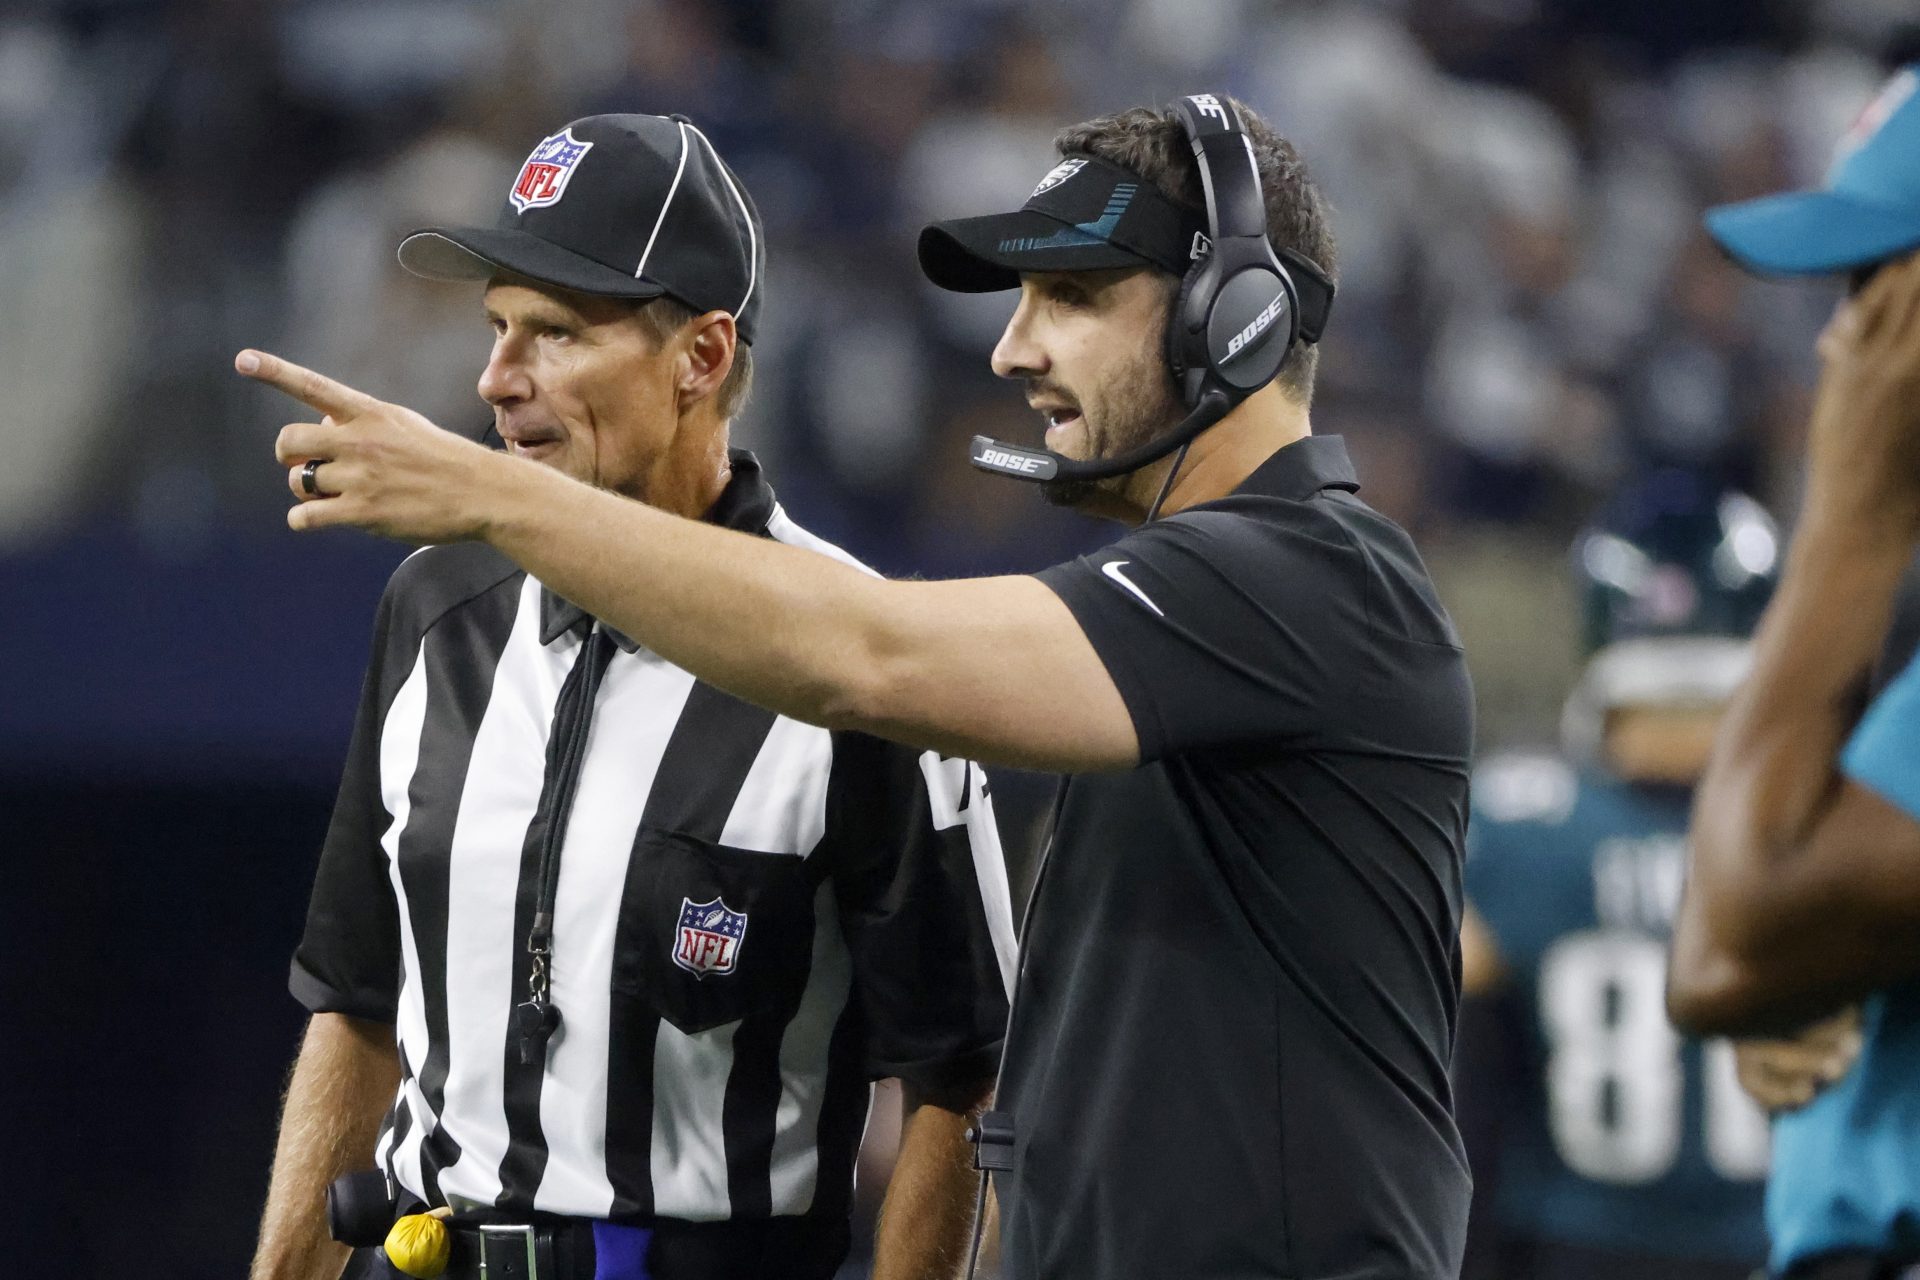 Philadelphia Eagles head coach Nick Sirianni, front, talks with an official in the first half of an NFL football game against the Dallas Cowboys in Arlington, Texas, Monday, Sept. 27, 2021.